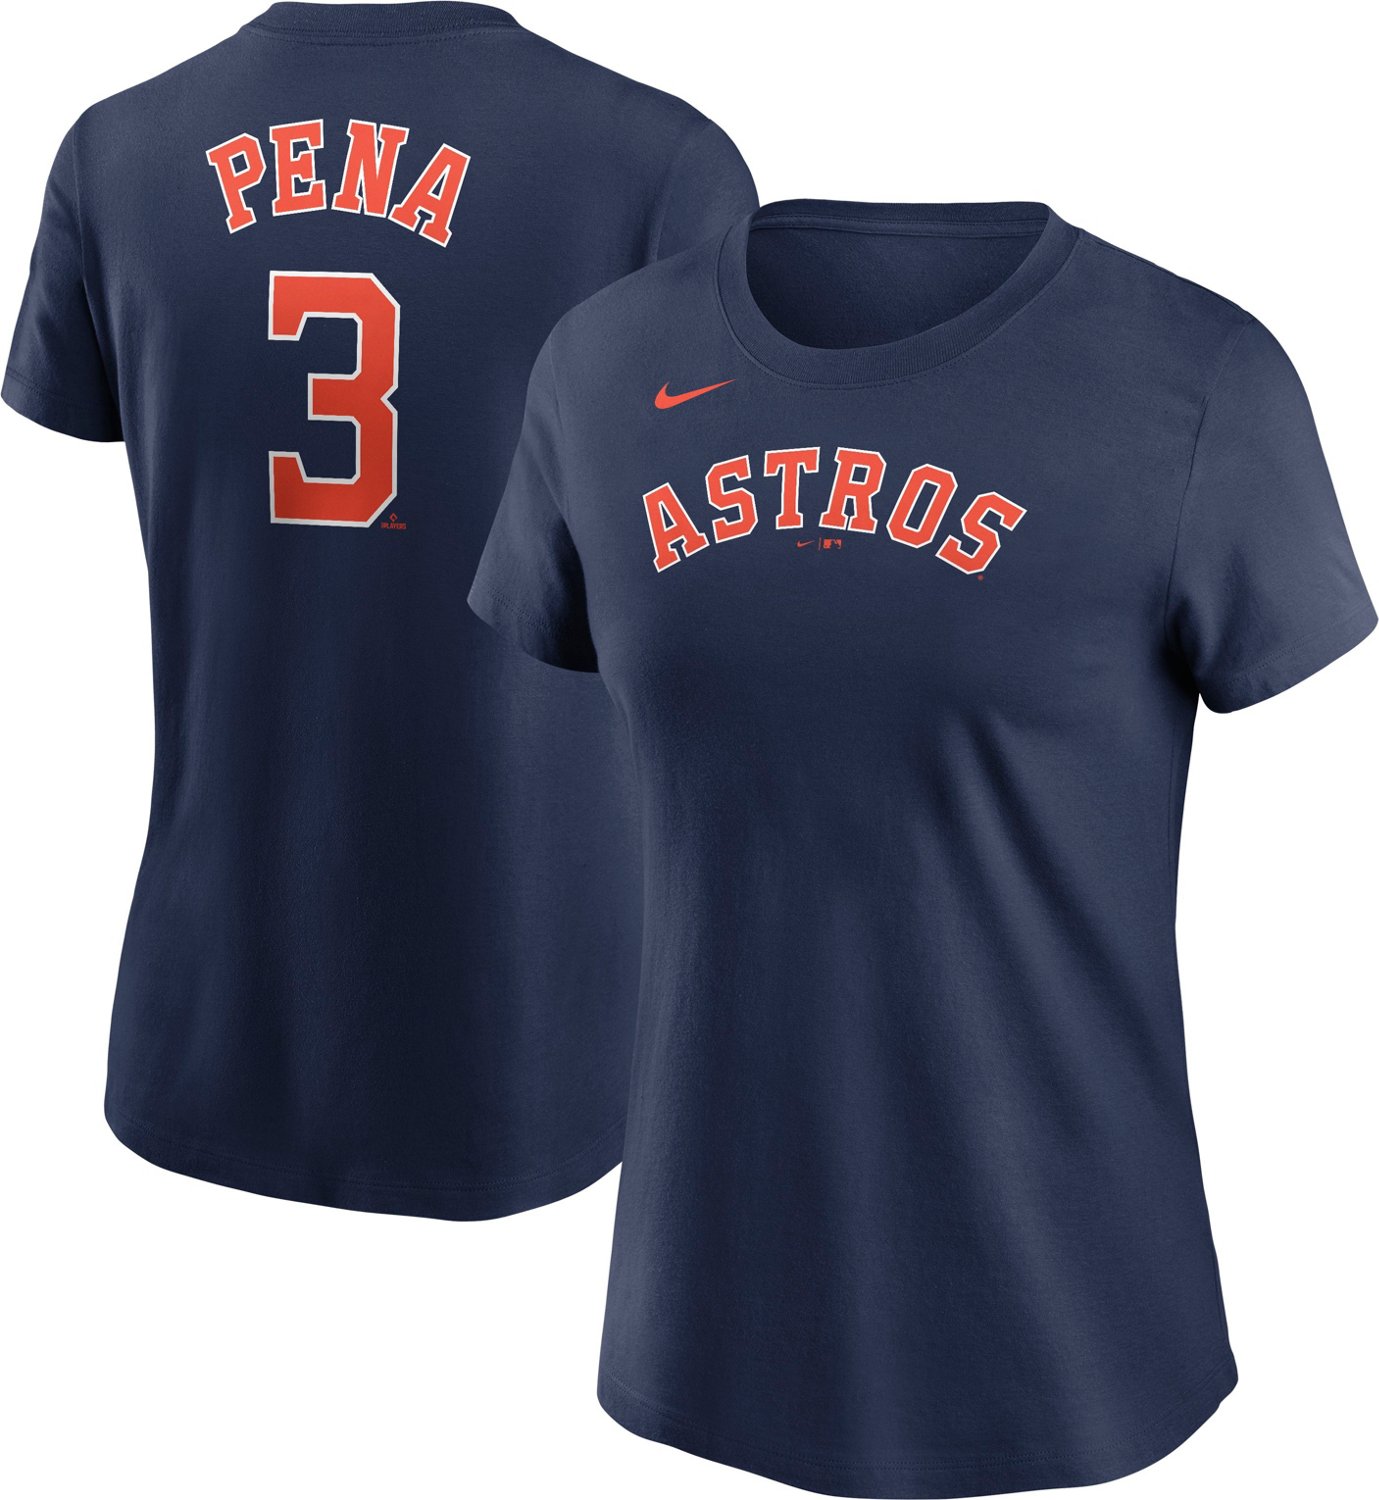 Nike Men’s Houston Astros Pena Name and Number Graphic T-Shirt Midnight Navy Blue, Medium - MLB Ss/Ls/Sl/Mck Tees at Academy Sports